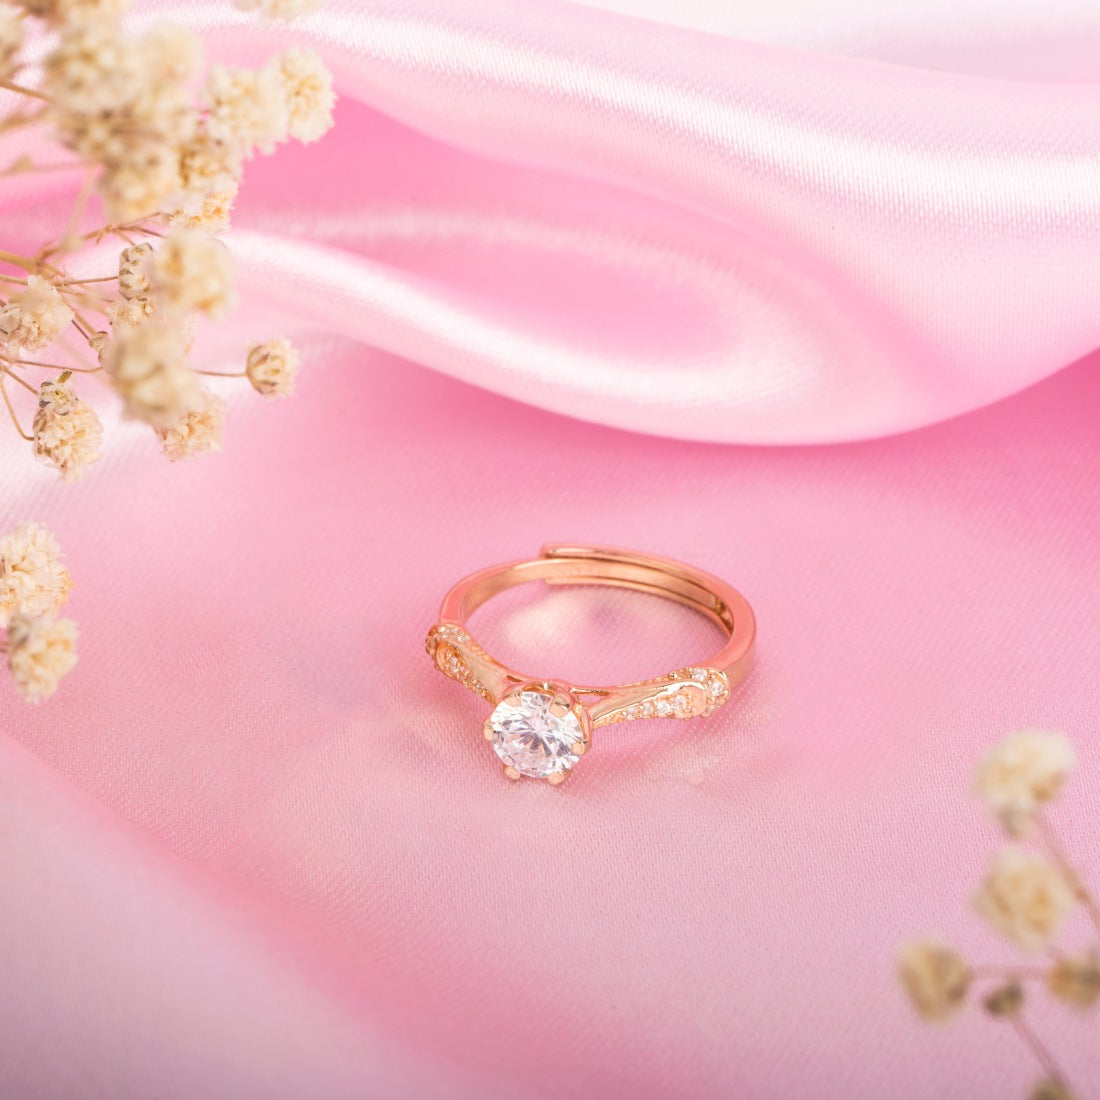 Blushing Rose Gold-Plated 925 Sterling Silver CZ Ring (Adjustable)